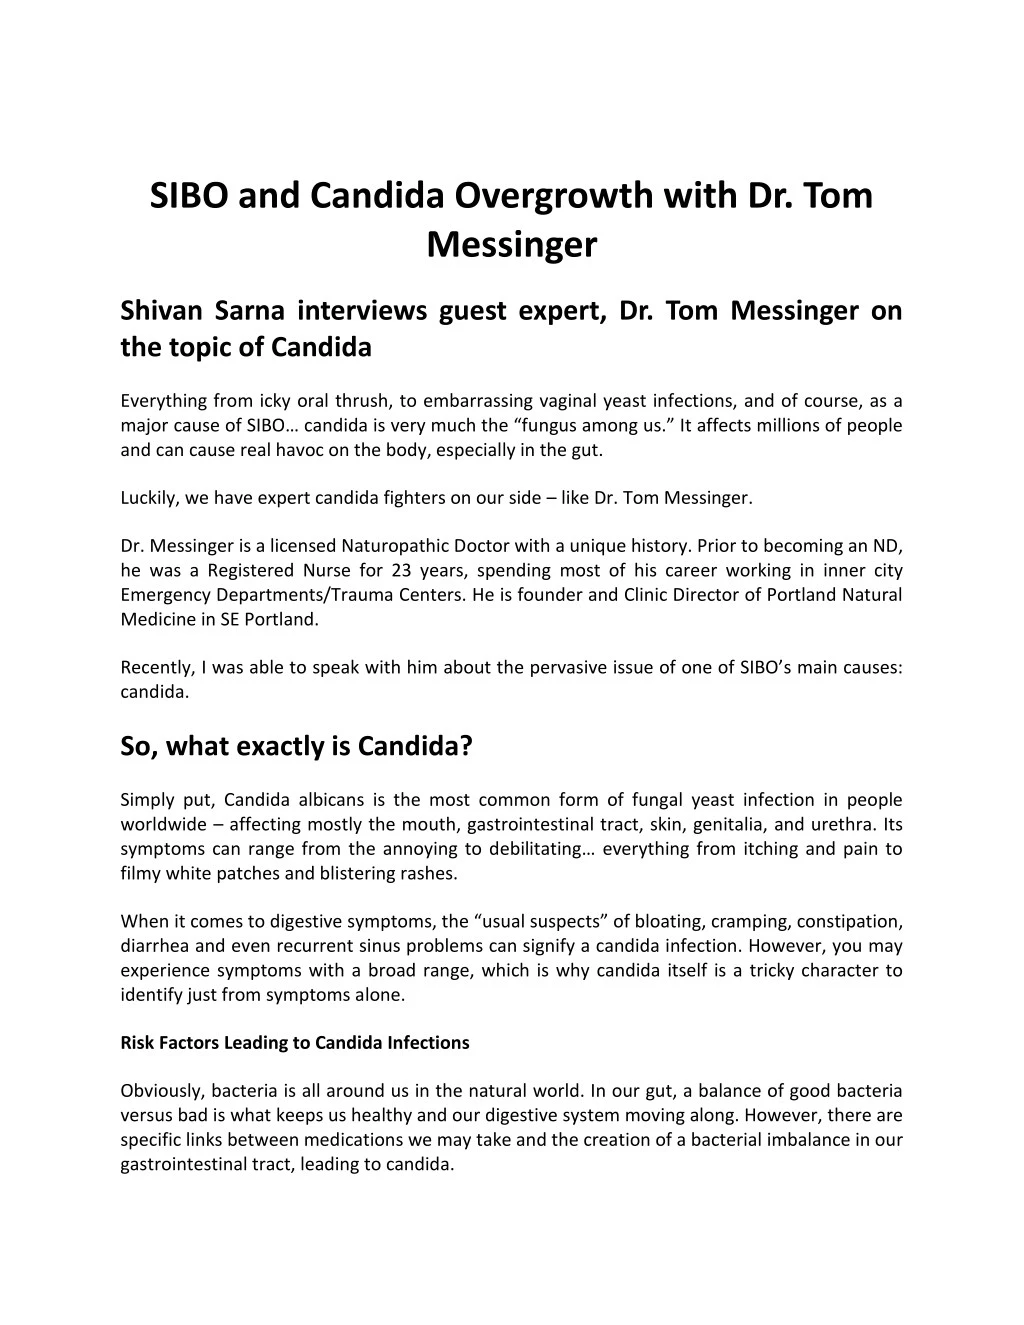 sibo and candida overgrowth with dr tom messinger